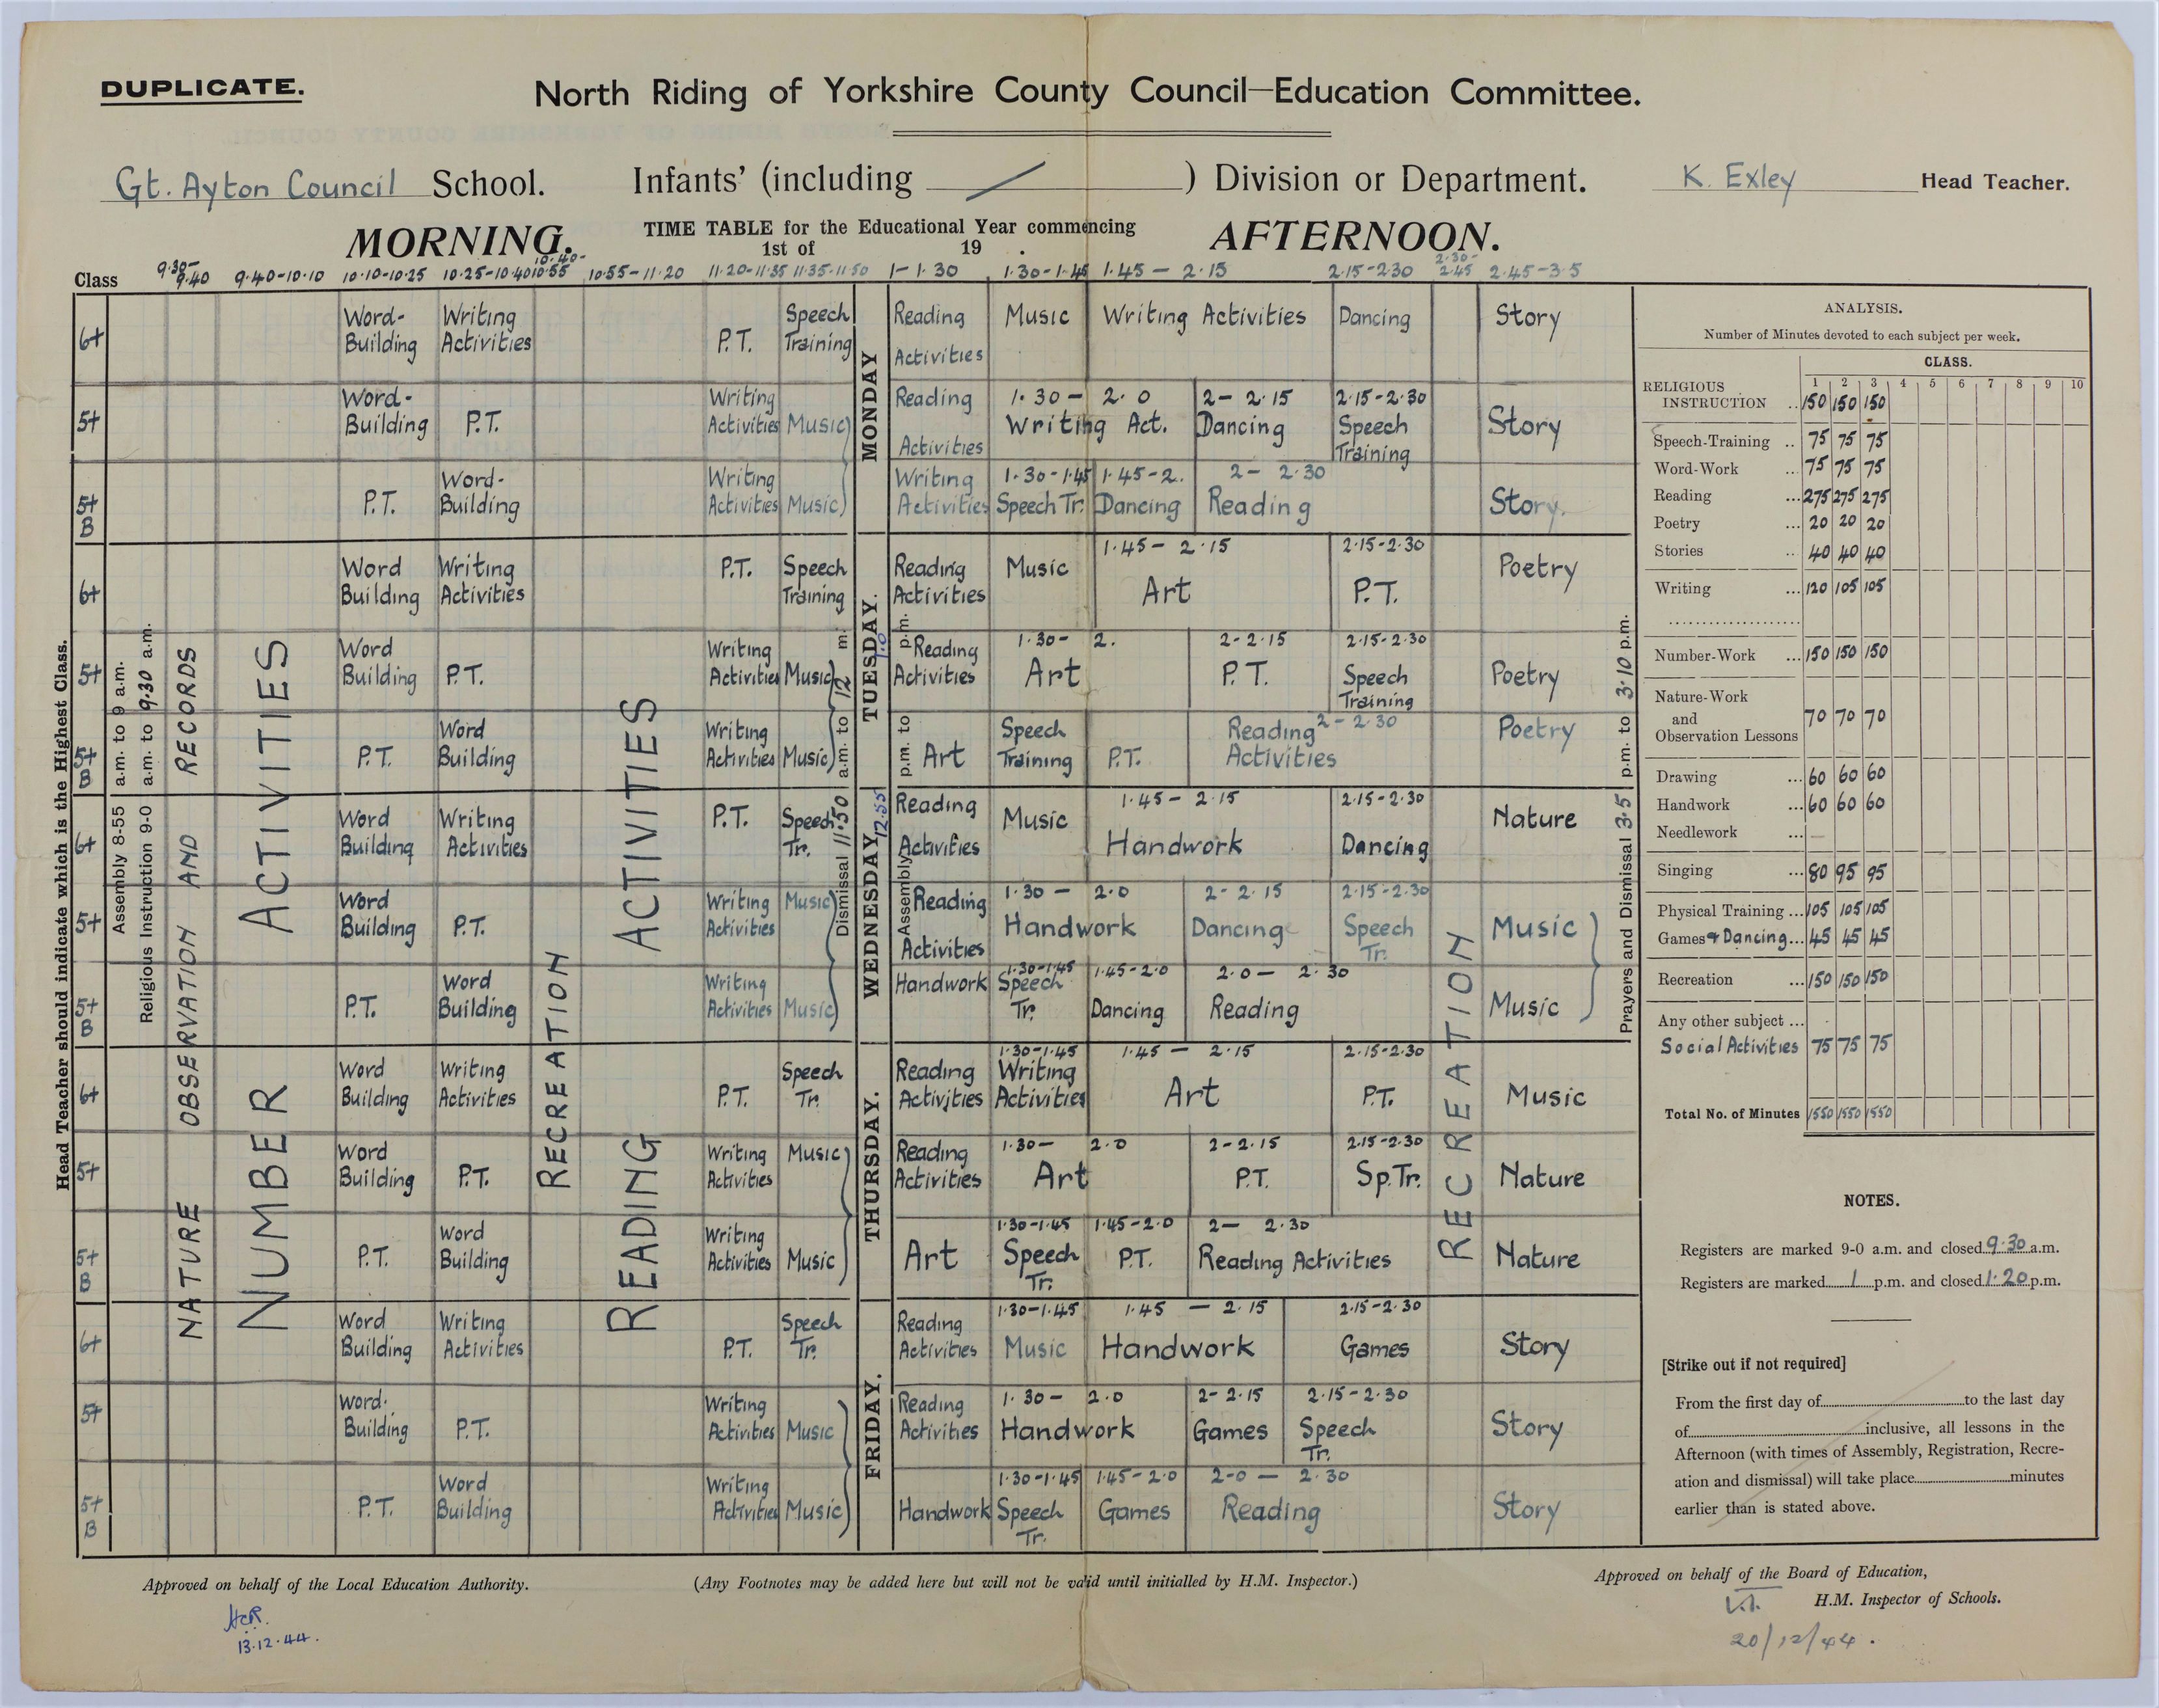 A duplicate timetable for Great Ayton Council School for 1945.